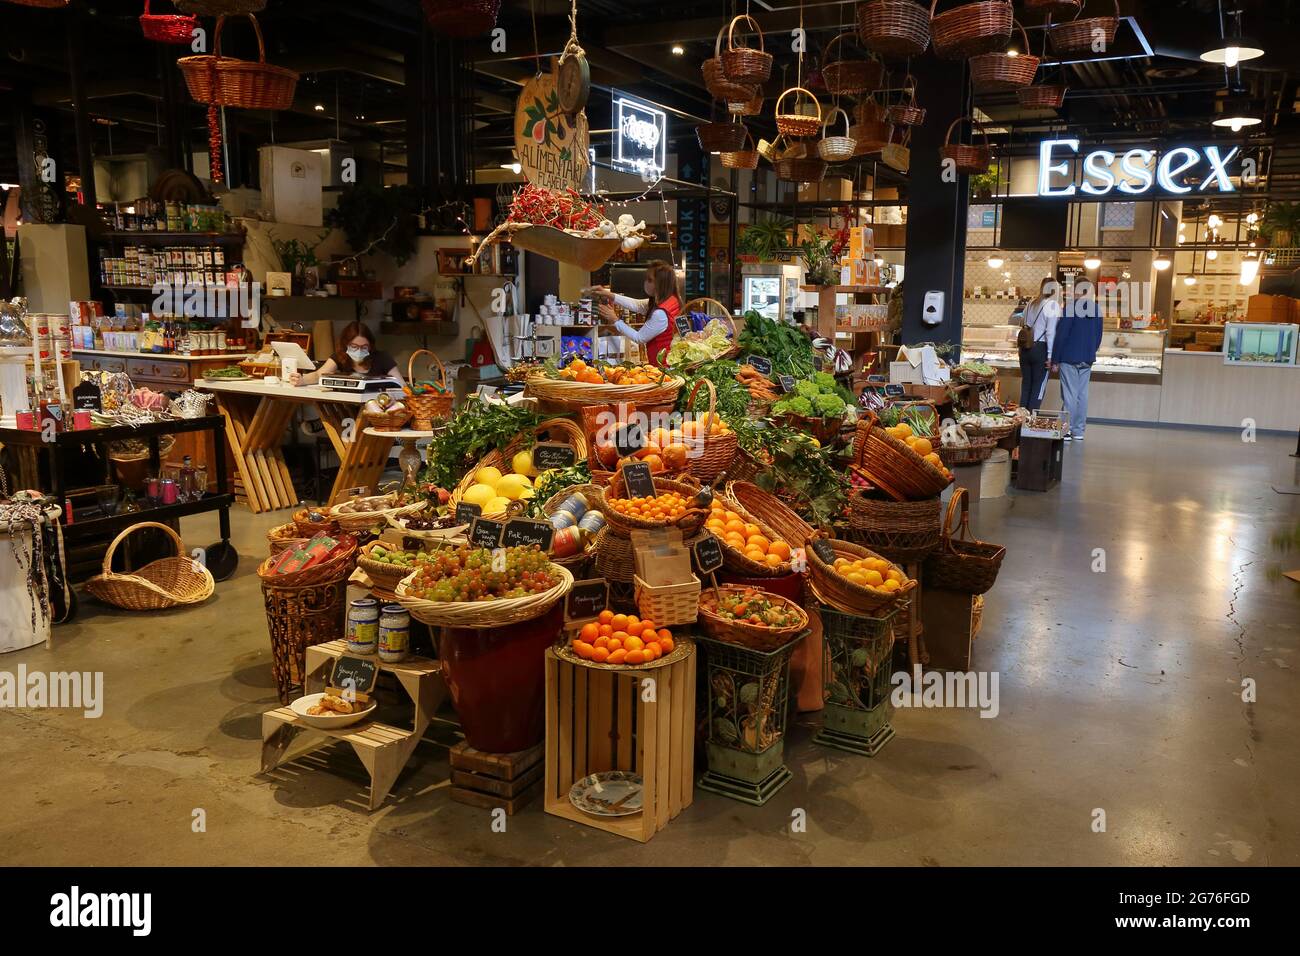 Alimentari Flâneur at The Market Line in Essex Market, 115 Delancey St, New York, NY. a specialty fruit and produce vendor. Stock Photo